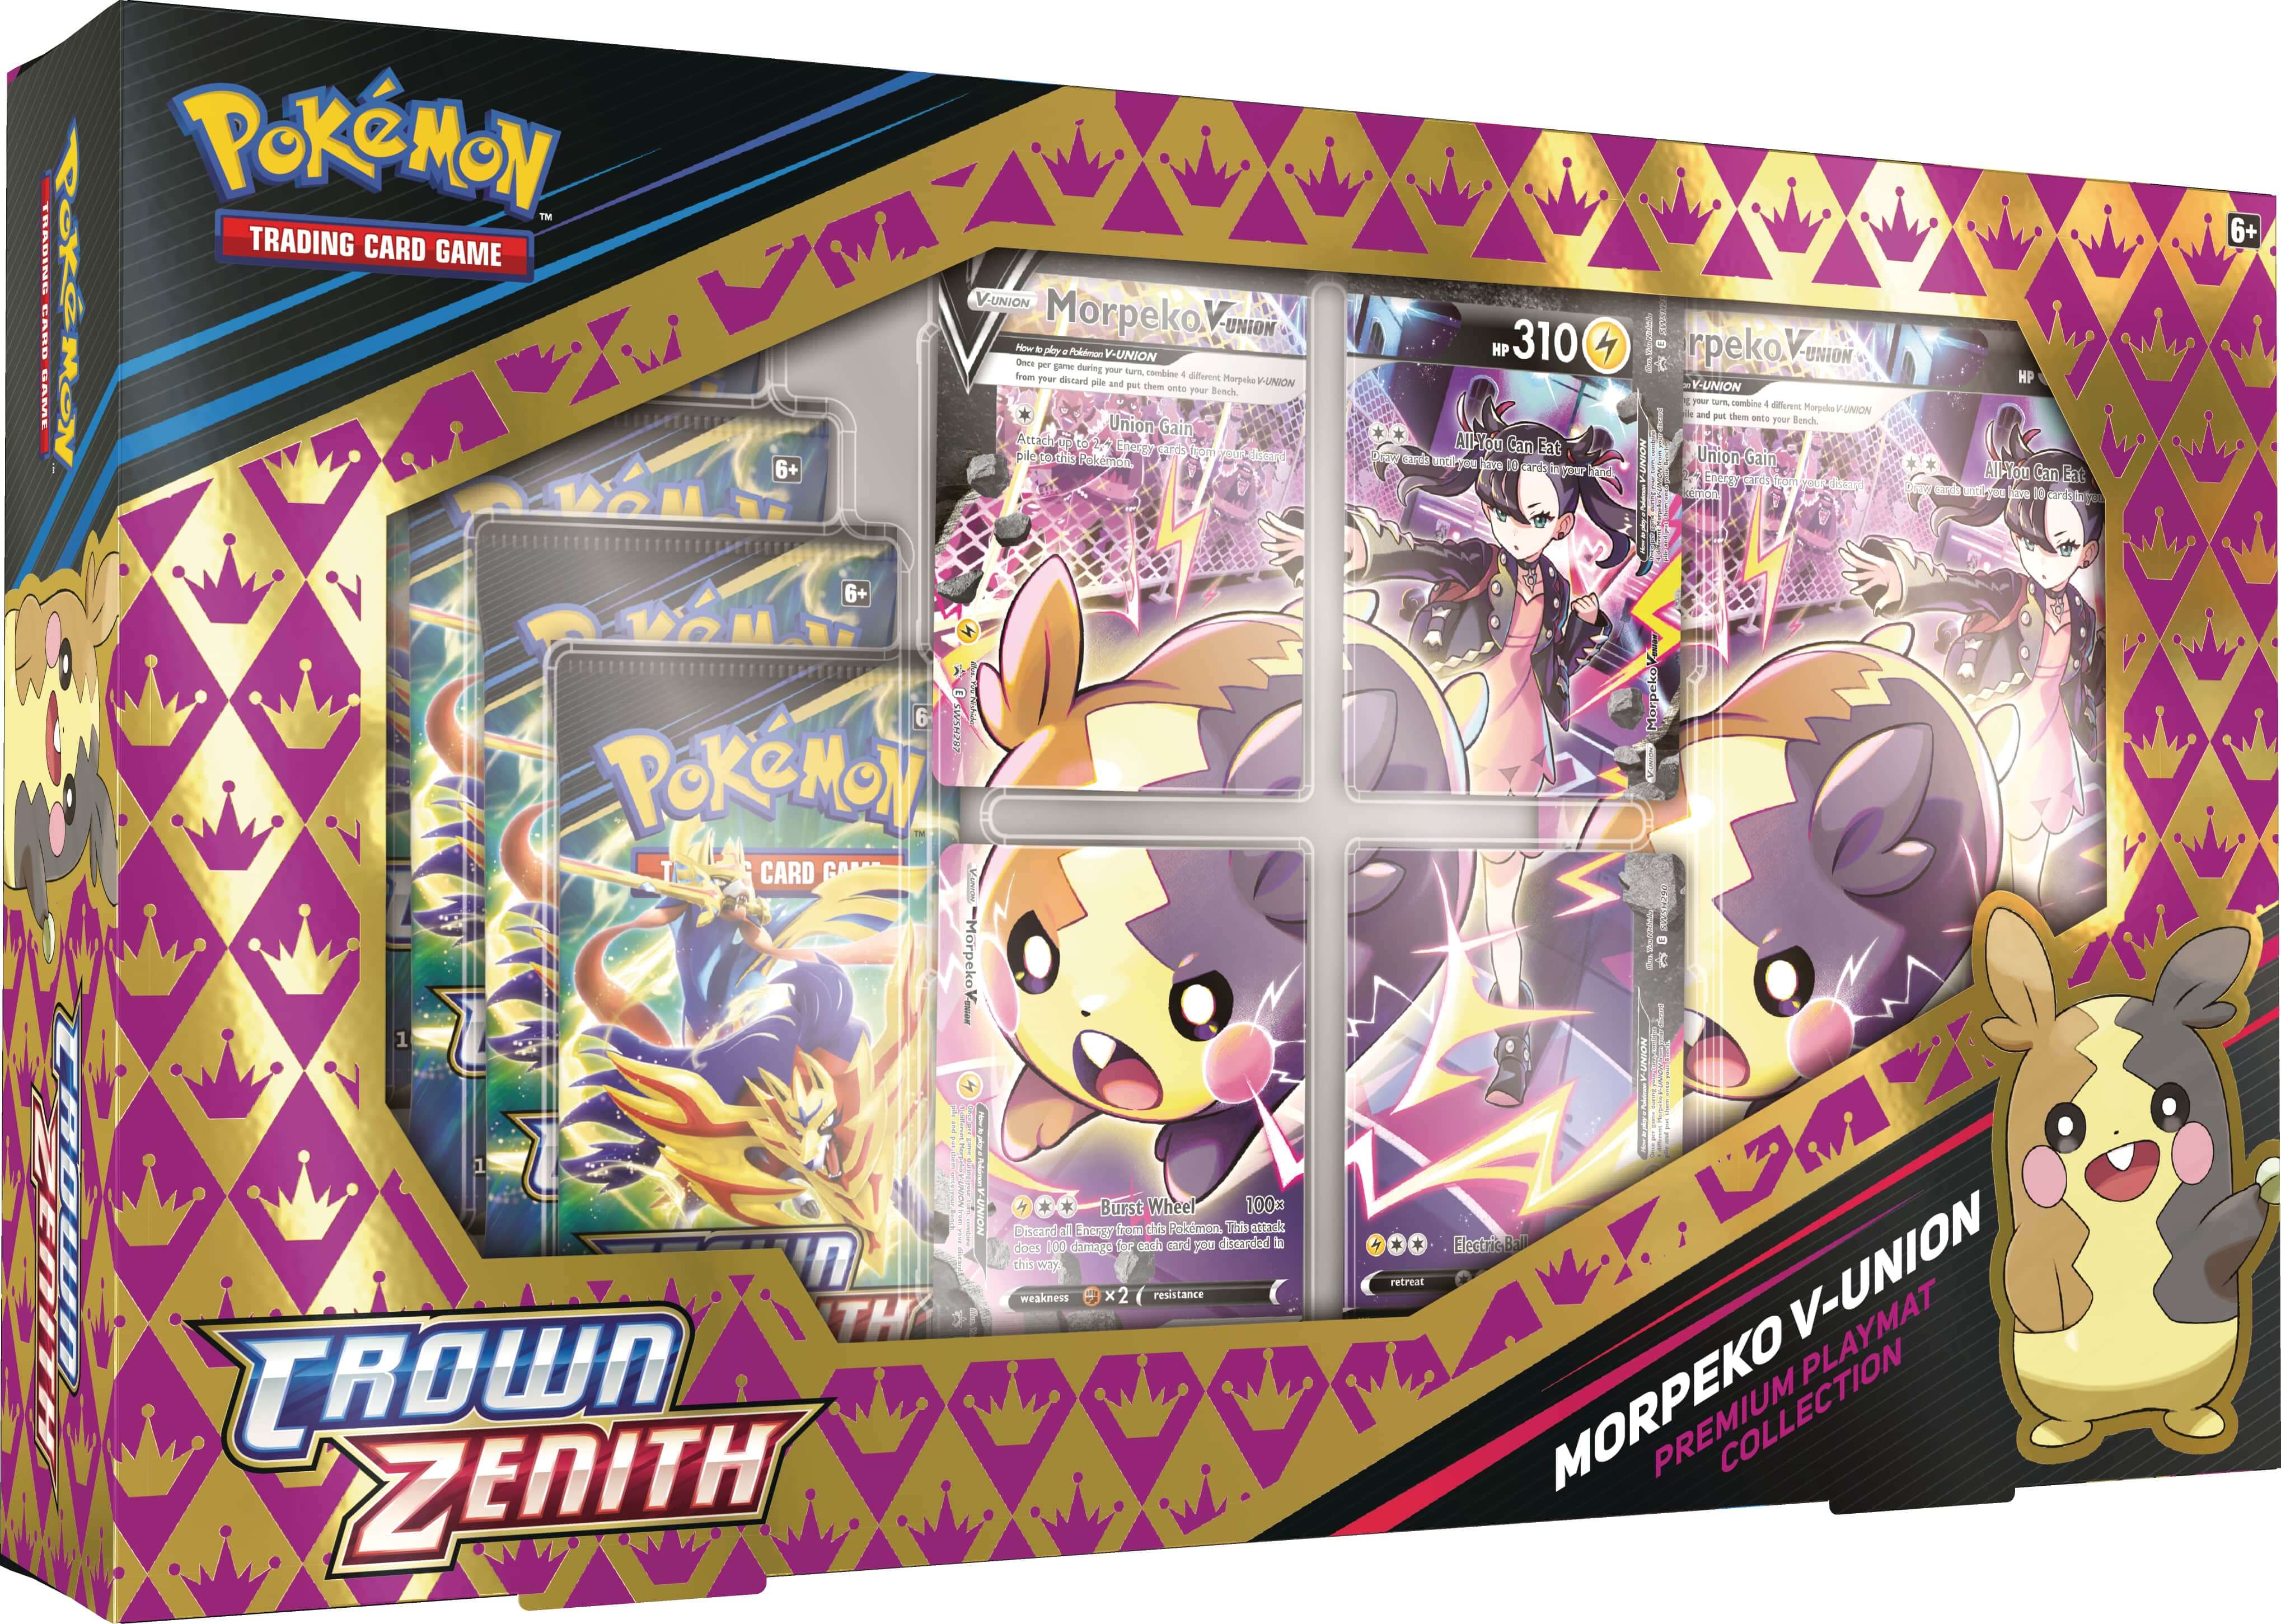 Crown Zenith Product Lineup is Officially Revealed! PokemonCard